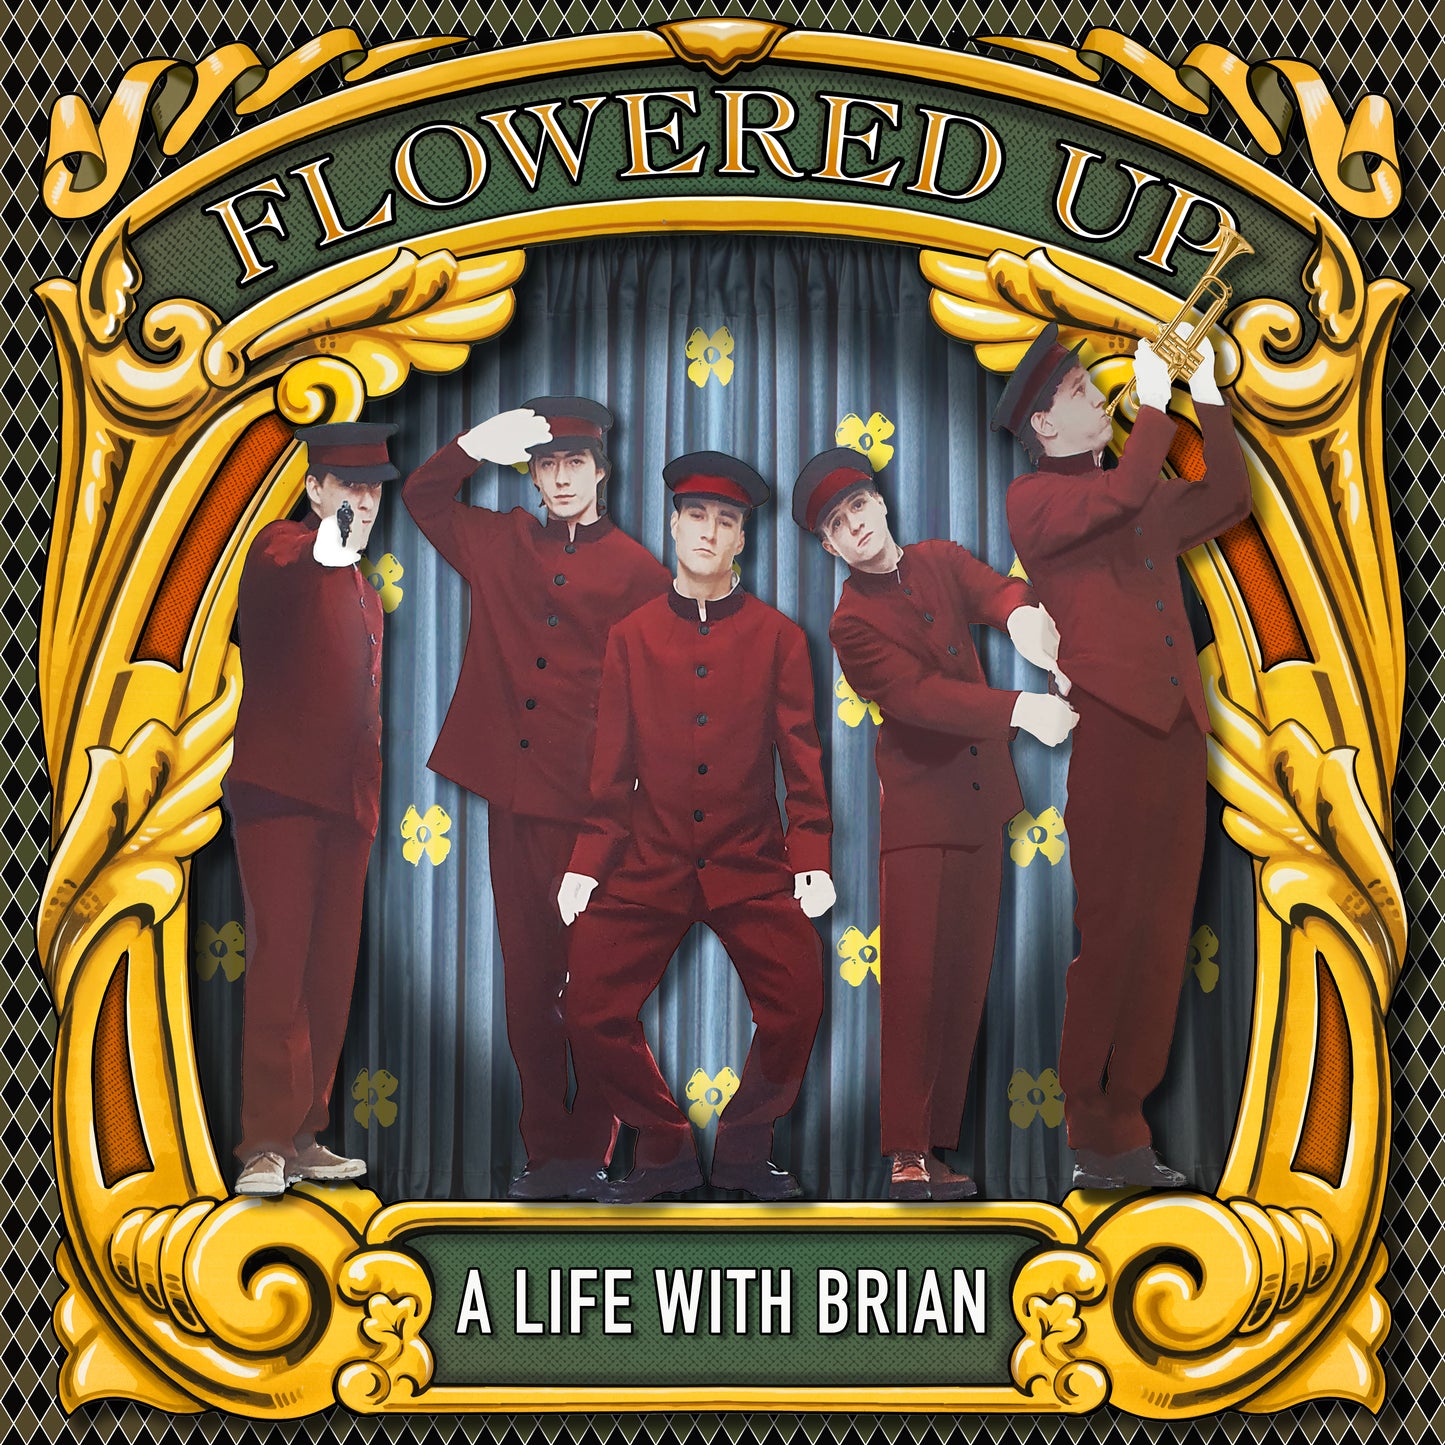 Flowered Up - A Life With Brian (Reissue)